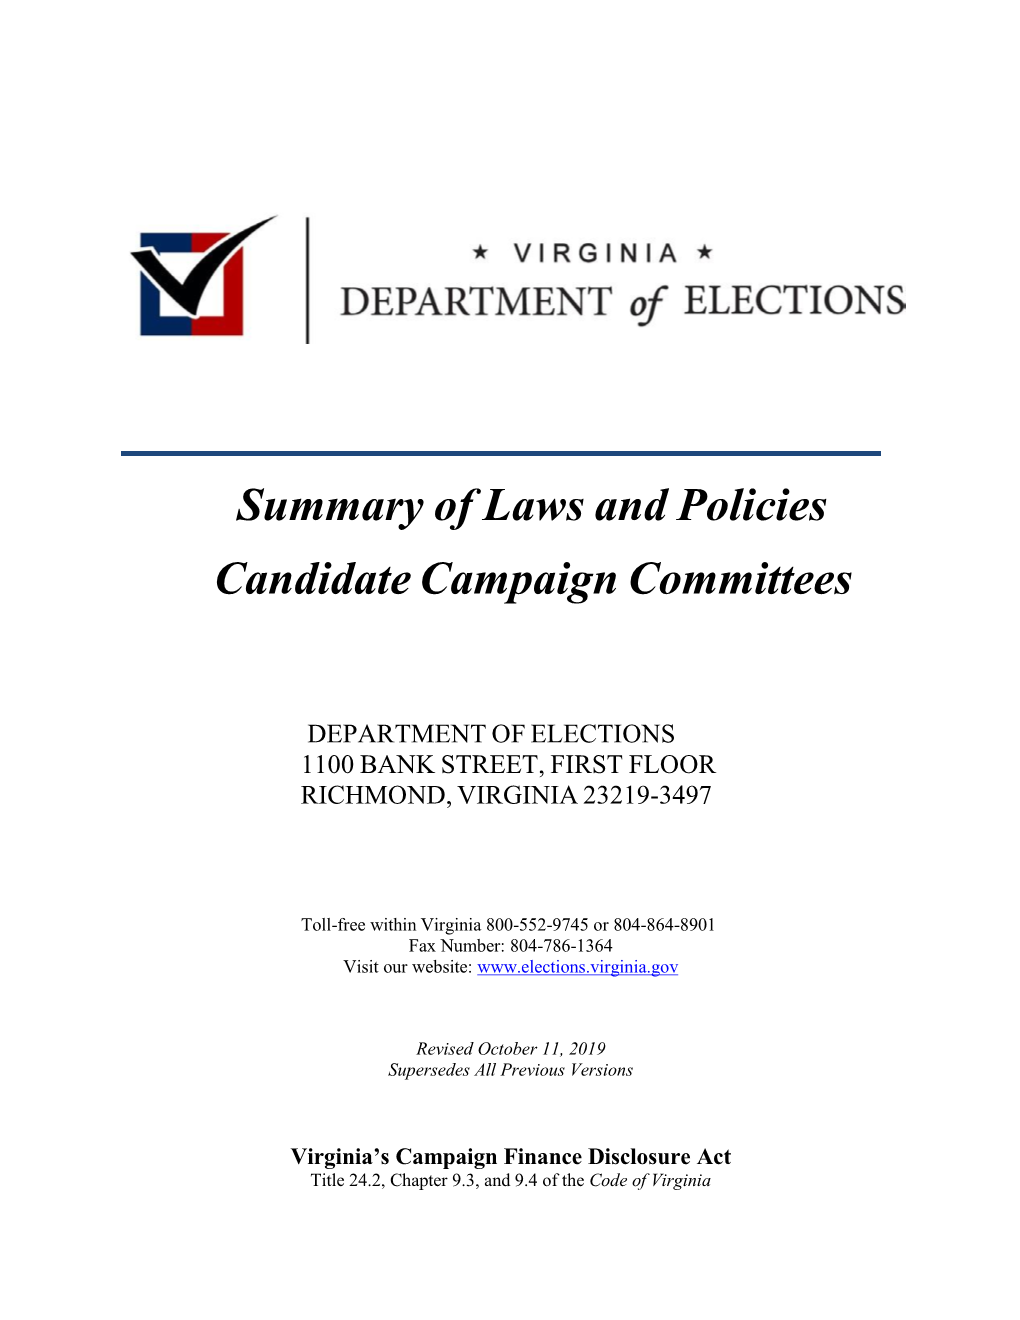 Summary of Laws and Policies Candidate Campaign Committees